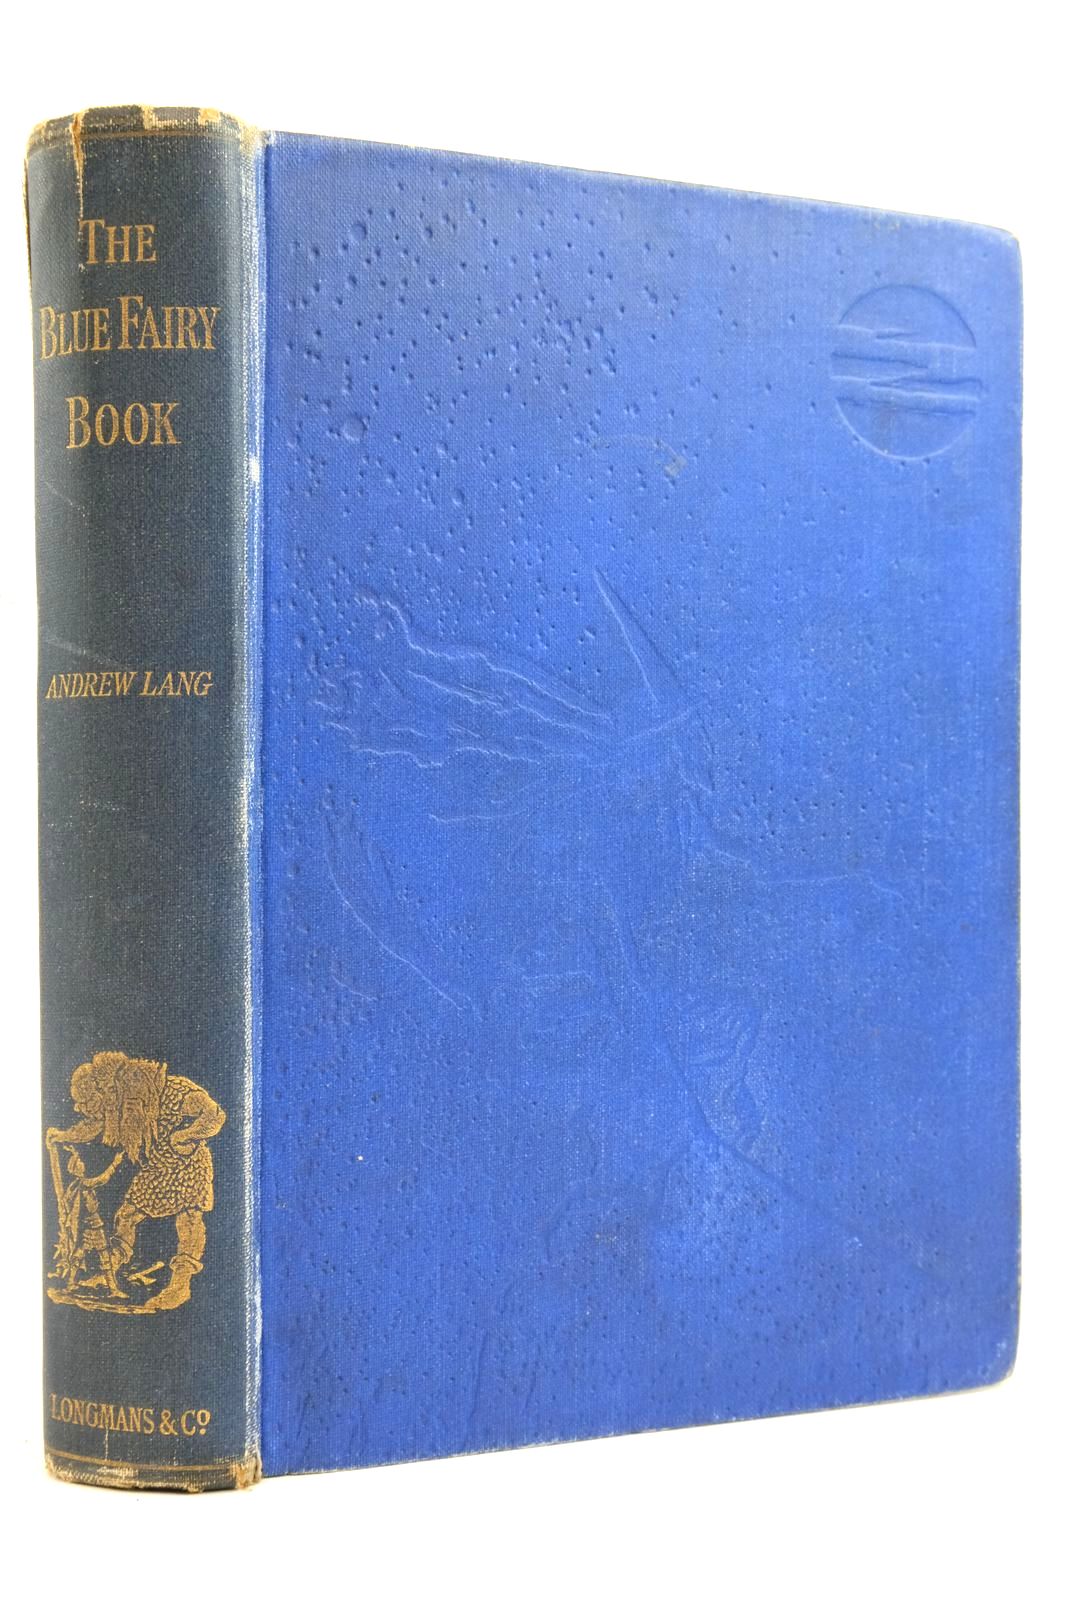 Photo of THE BLUE FAIRY BOOK written by Lang, Andrew illustrated by Ford, H.J.
Hood, G.P. Jacomb published by Longmans, Green & Co. (STOCK CODE: 2135880)  for sale by Stella & Rose's Books